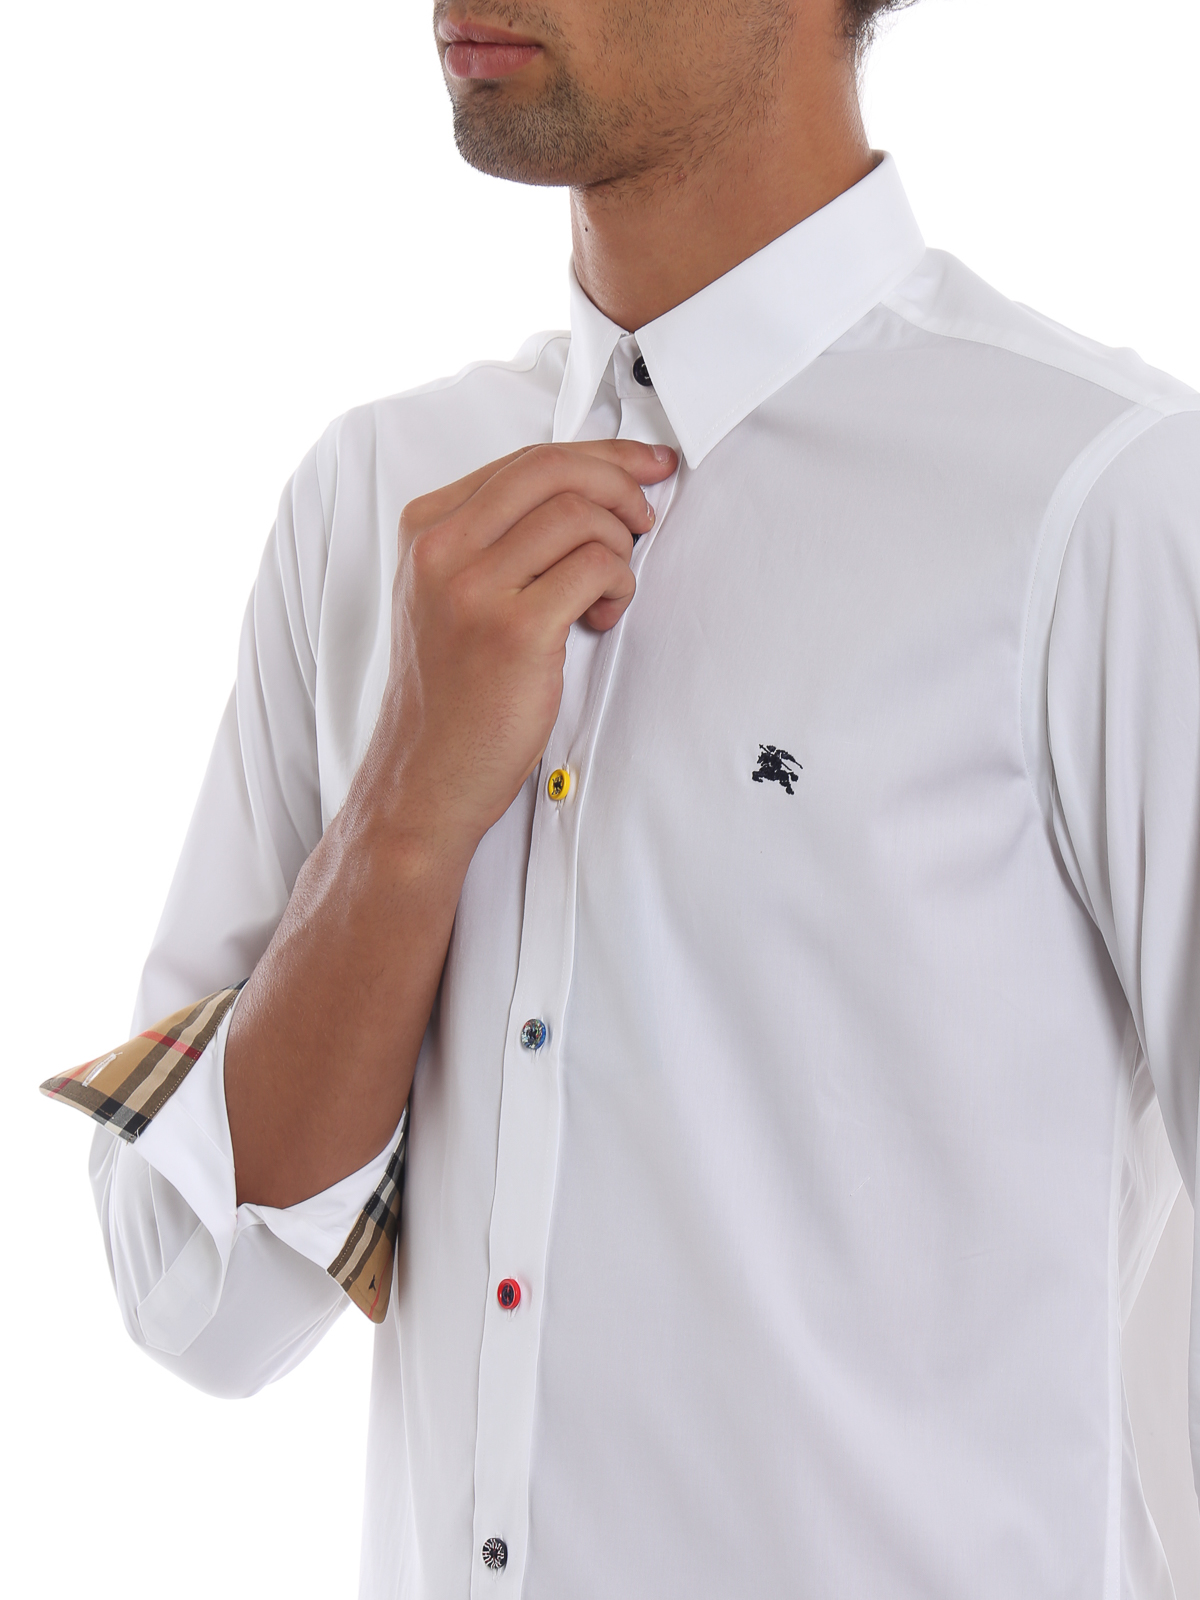 Burberry White Shirt Discount, 54% OFF ...